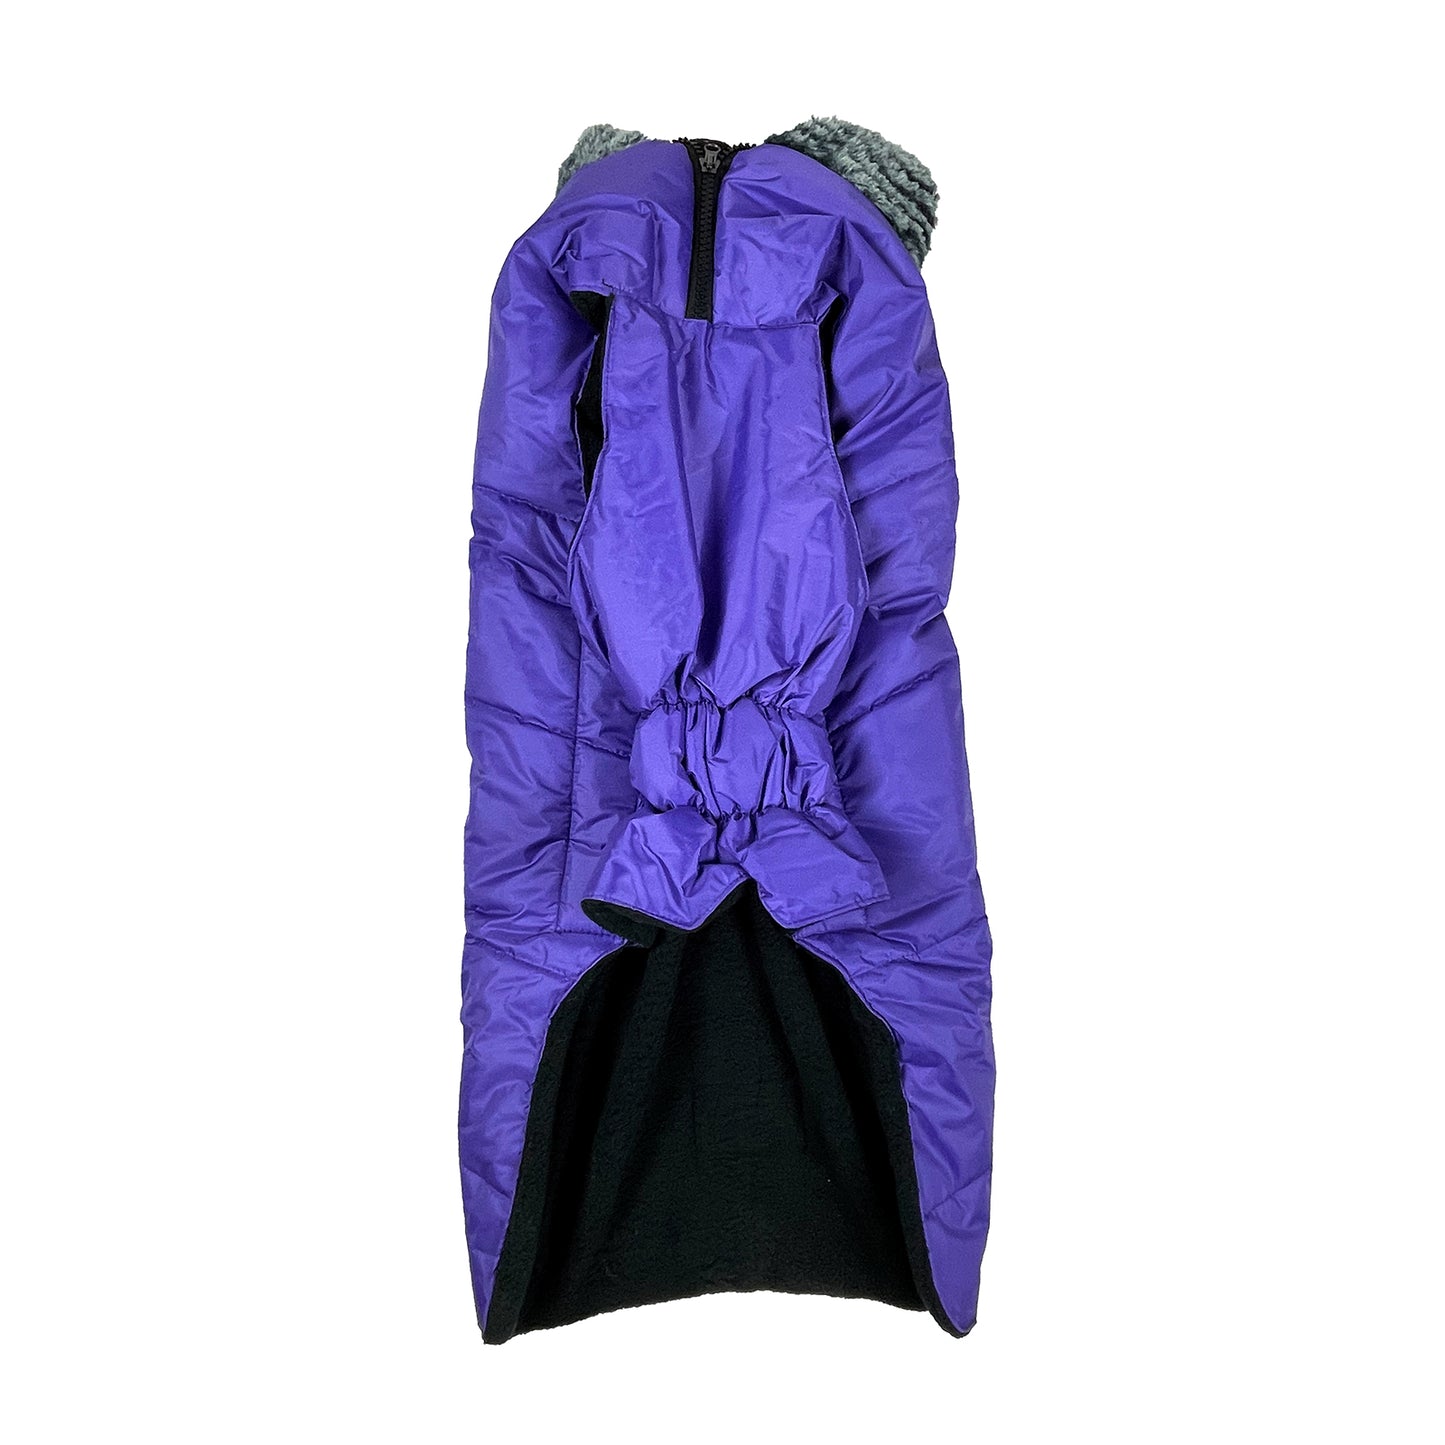 Tails Nation Solid Fur Jacket Purple | Warm and Stylish with Harness Opening